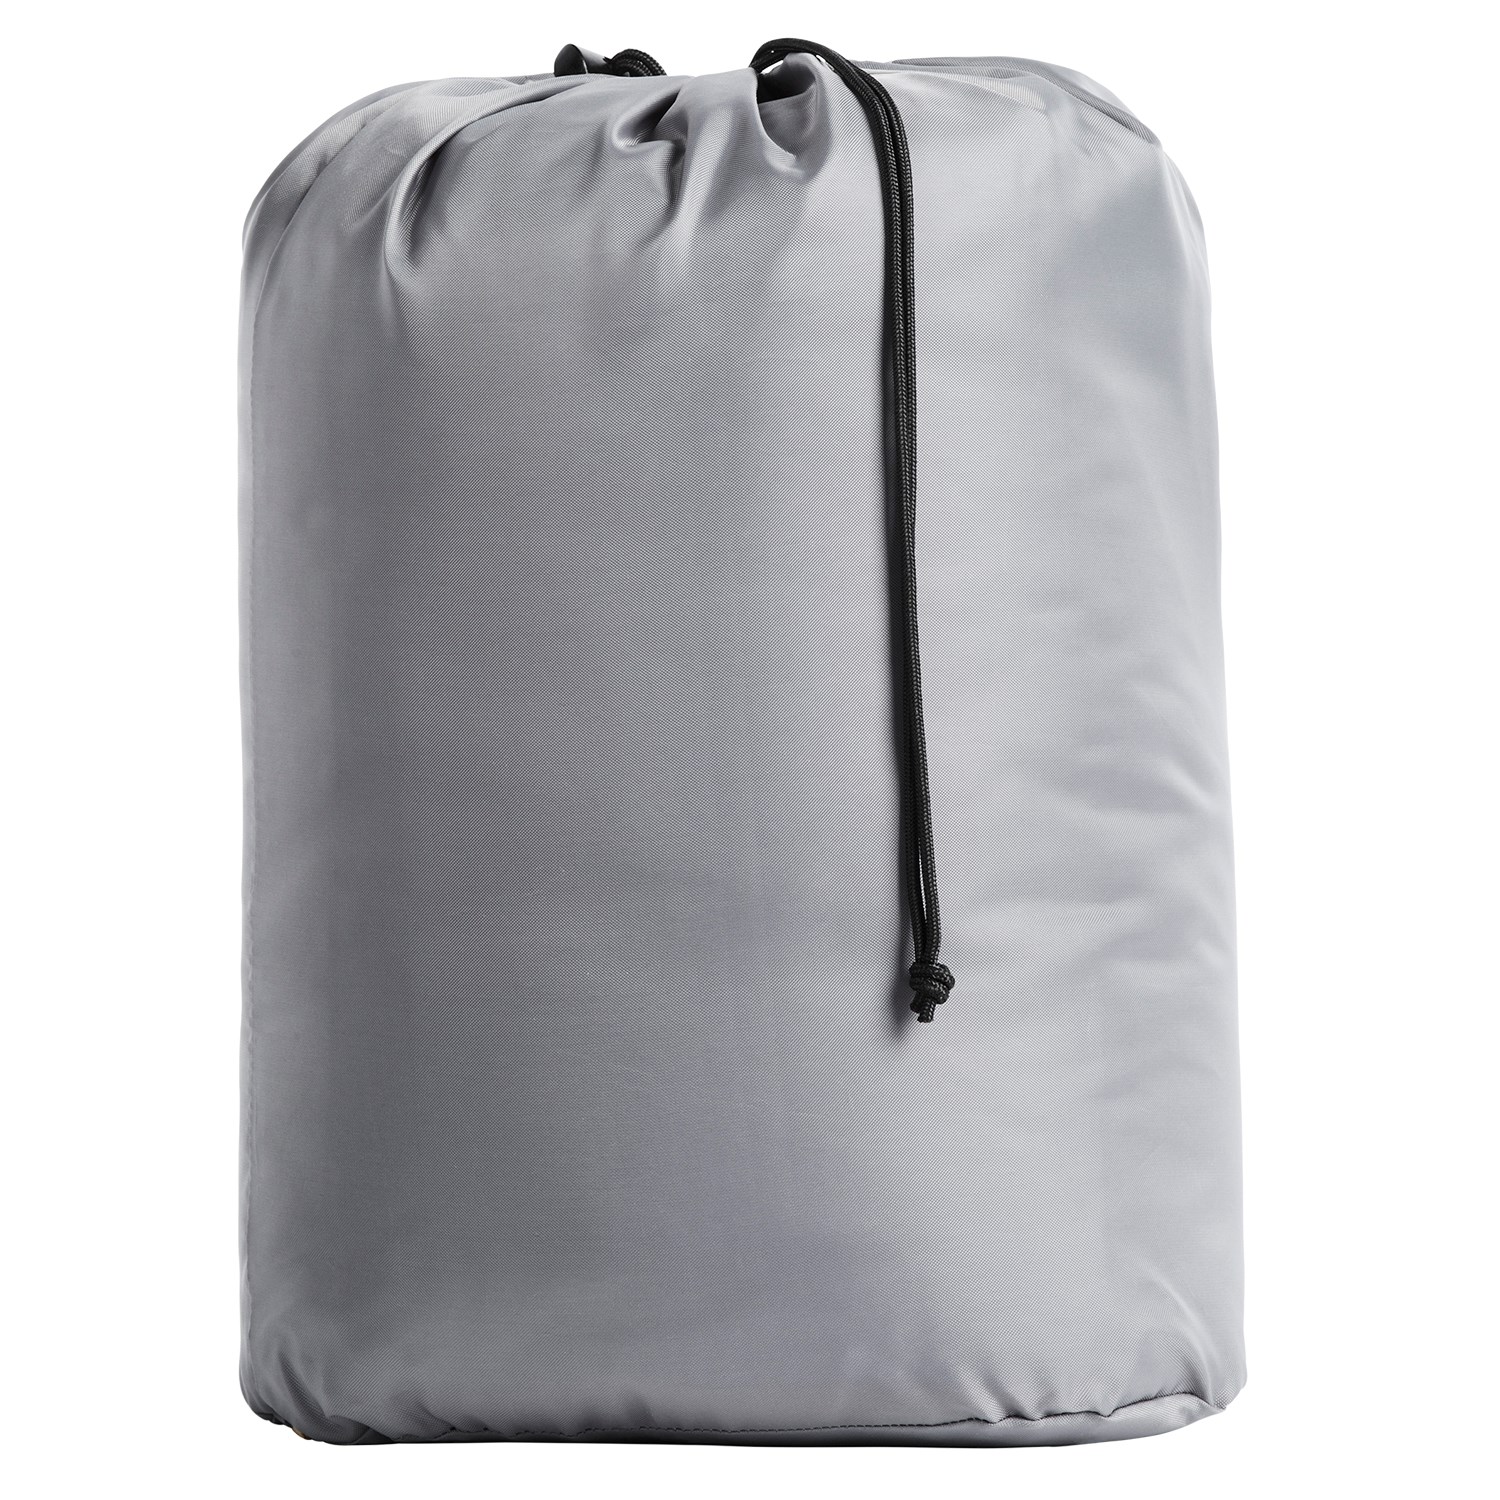 north face wasatch 30 sleeping bag